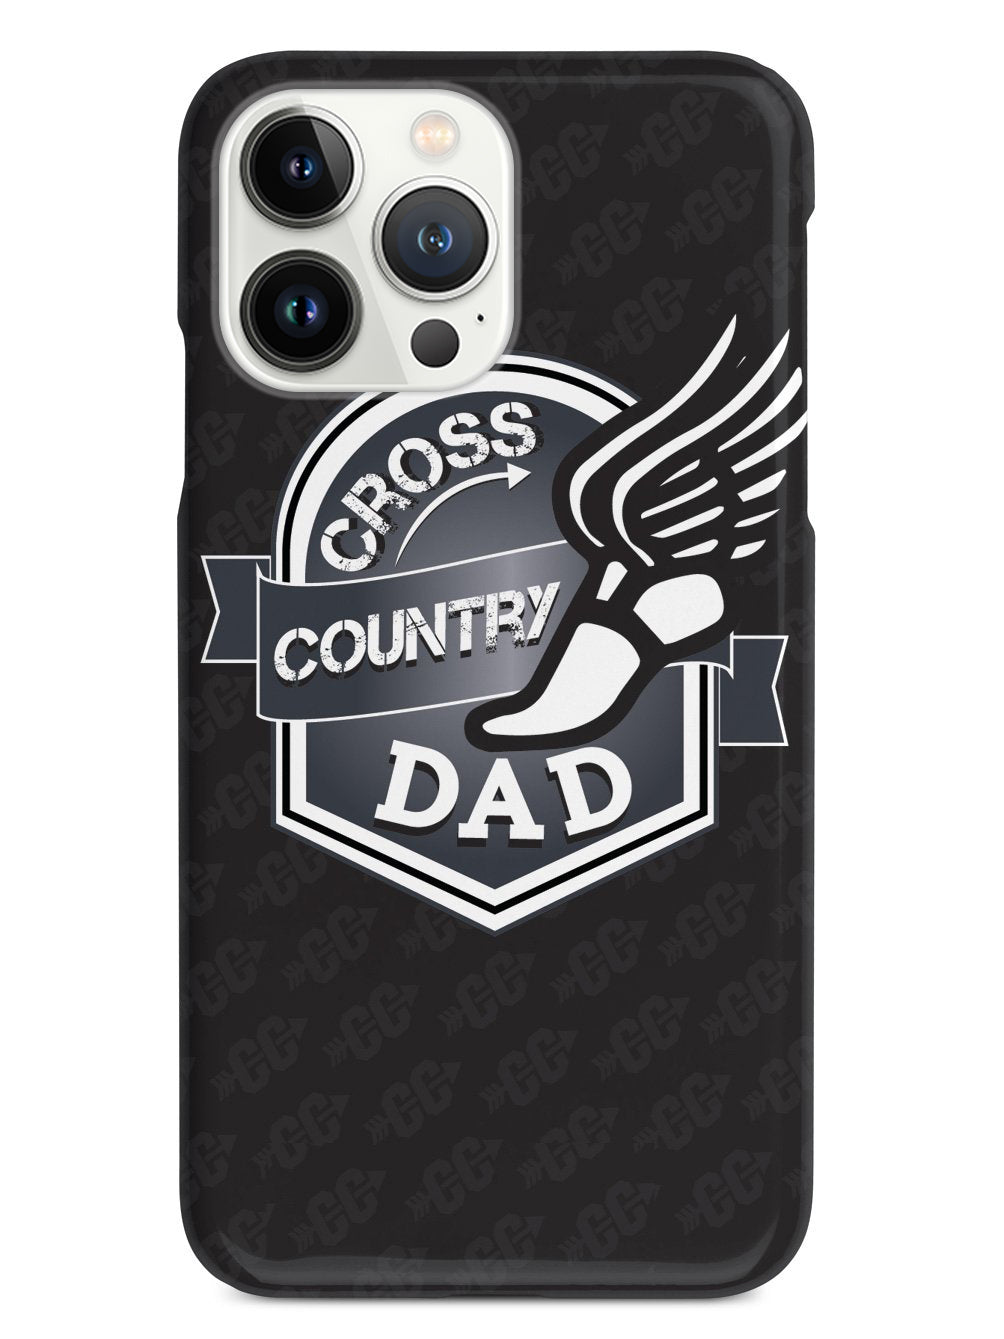 Cross Country Dad Case